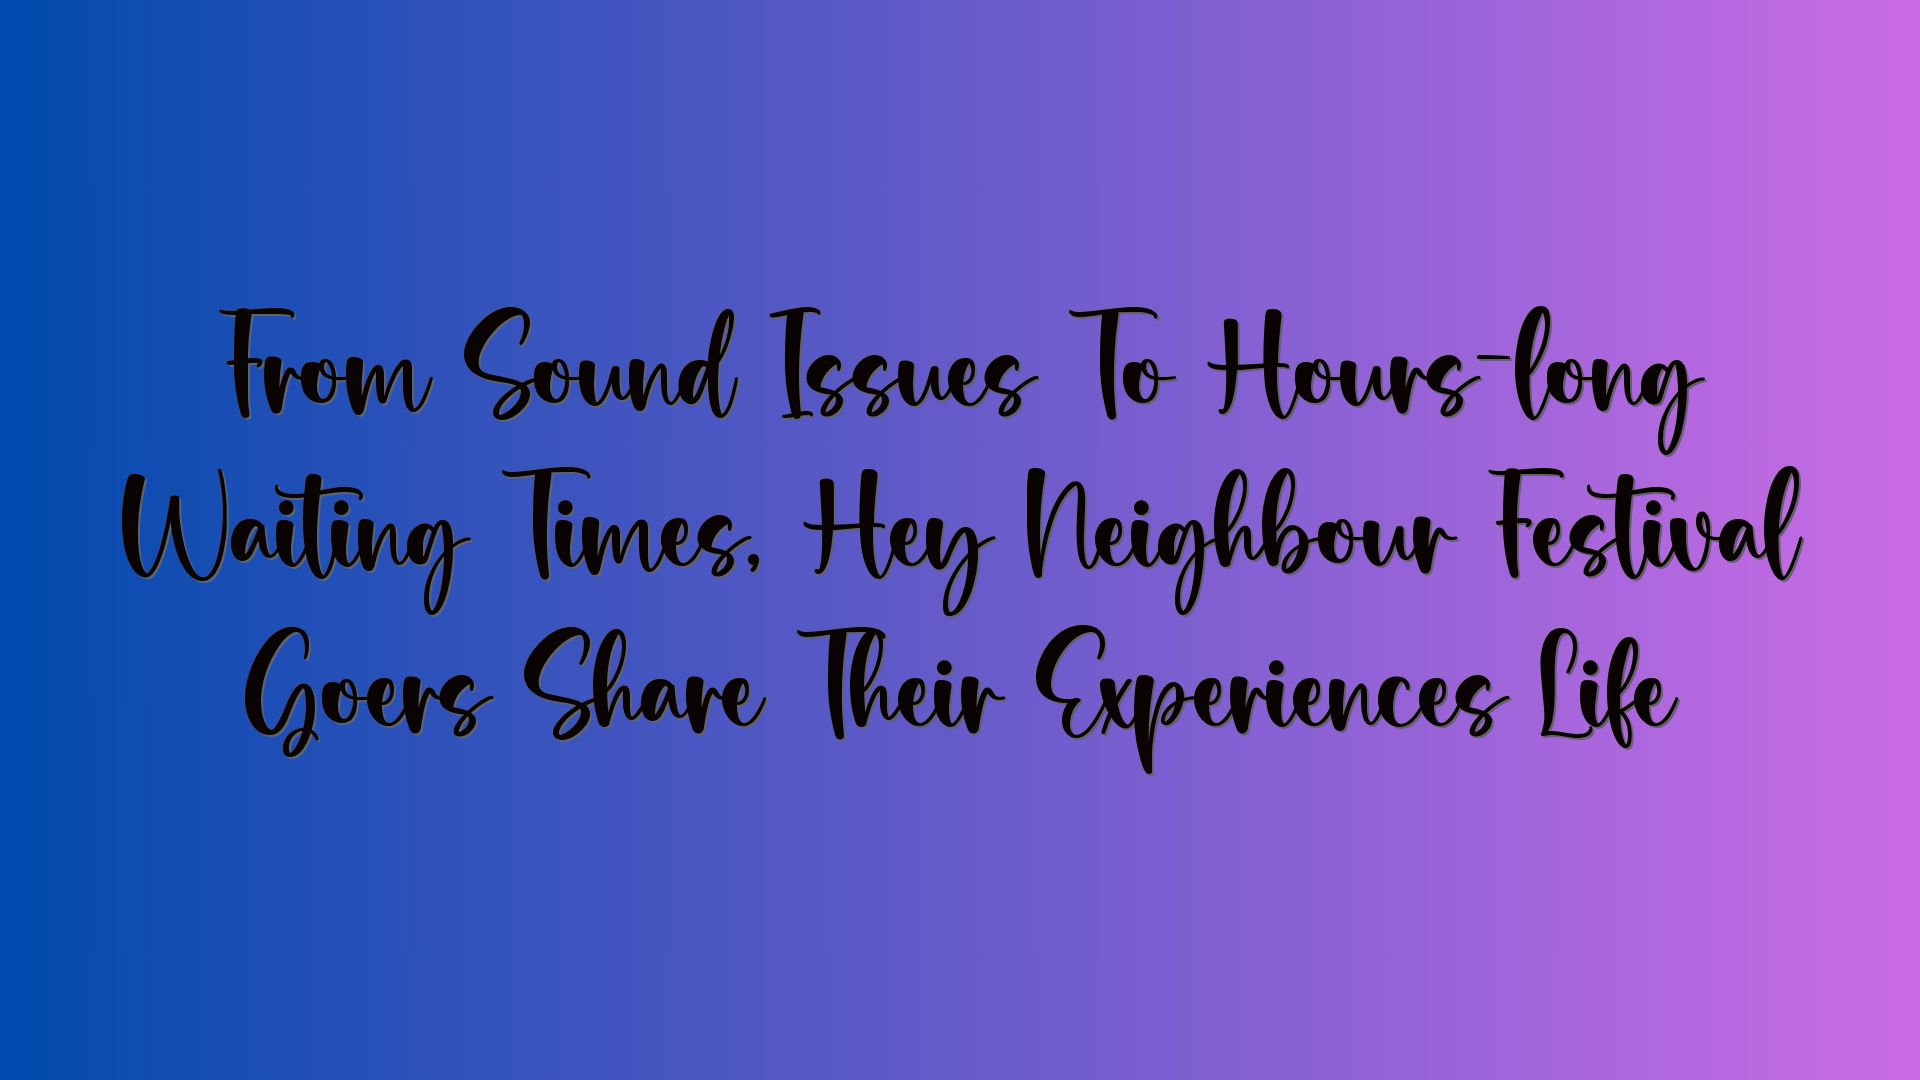 From Sound Issues To Hours-long Waiting Times, Hey Neighbour Festival Goers Share Their Experiences Life